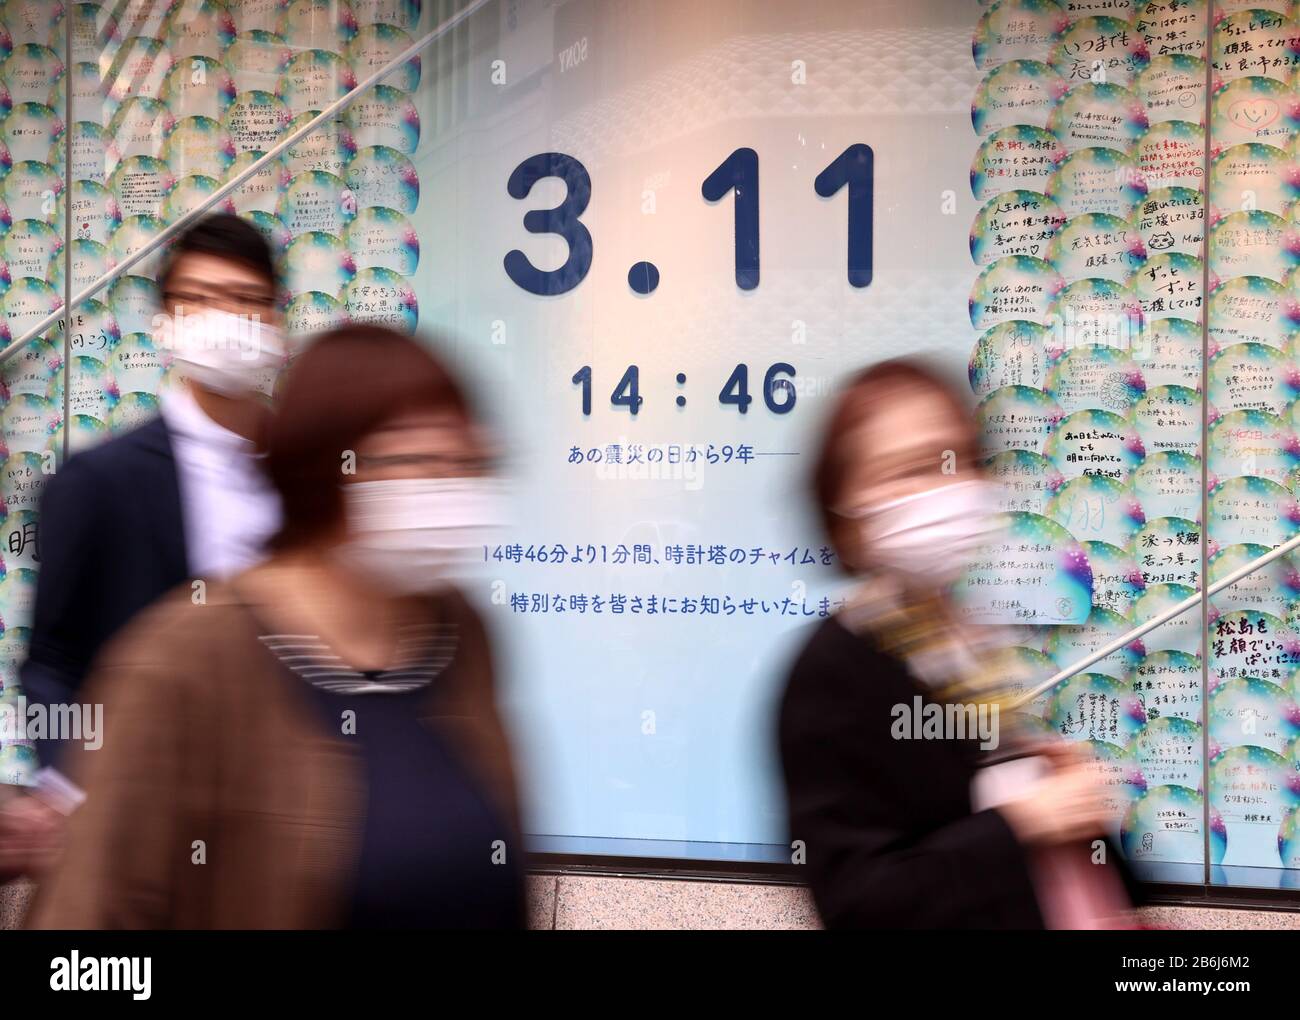 Tokyo Japan 11th Mar Pedestrians Pass A Large Shop Window Which Displays Messages For The Victims Of 3 11 Earthquake And Tsunami To Mark The 9th Anniversary Of The Great East Japan